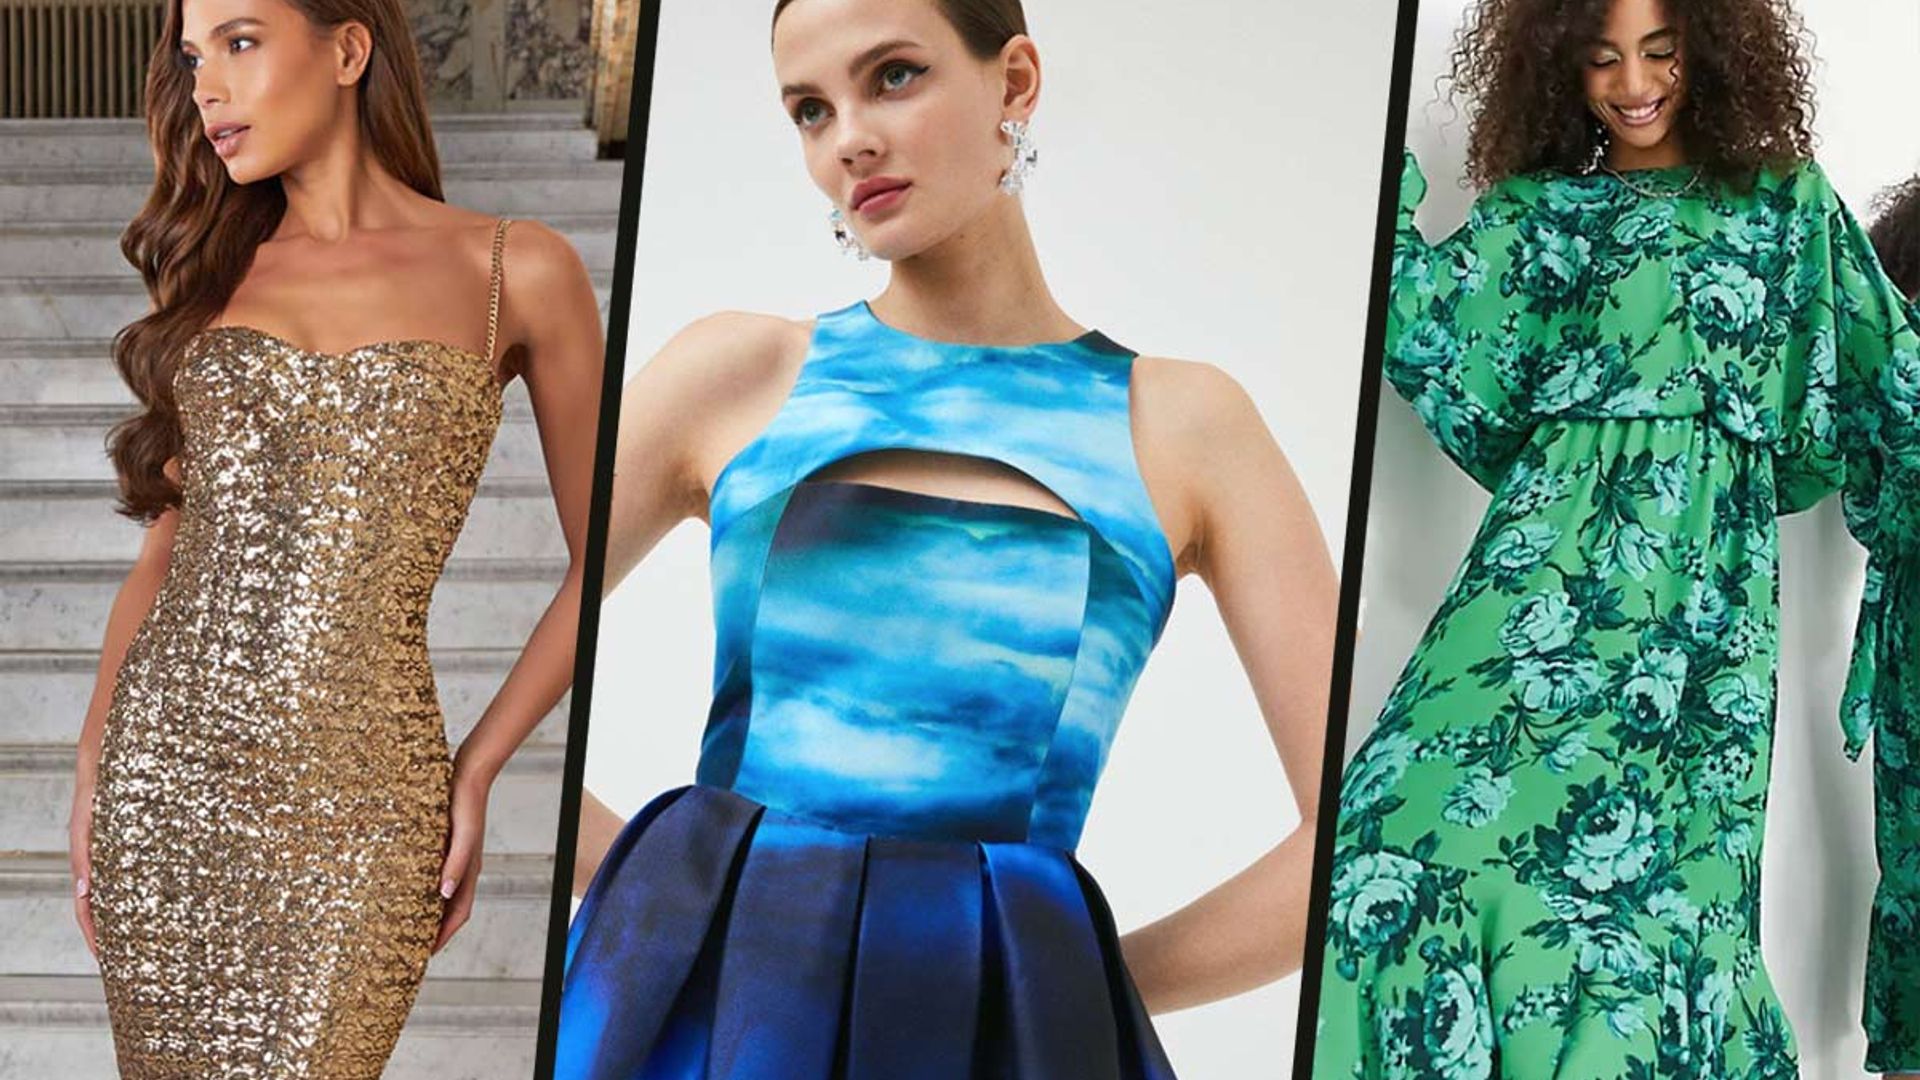 19 winter wedding guest outfit ideas you're going to absolutely love